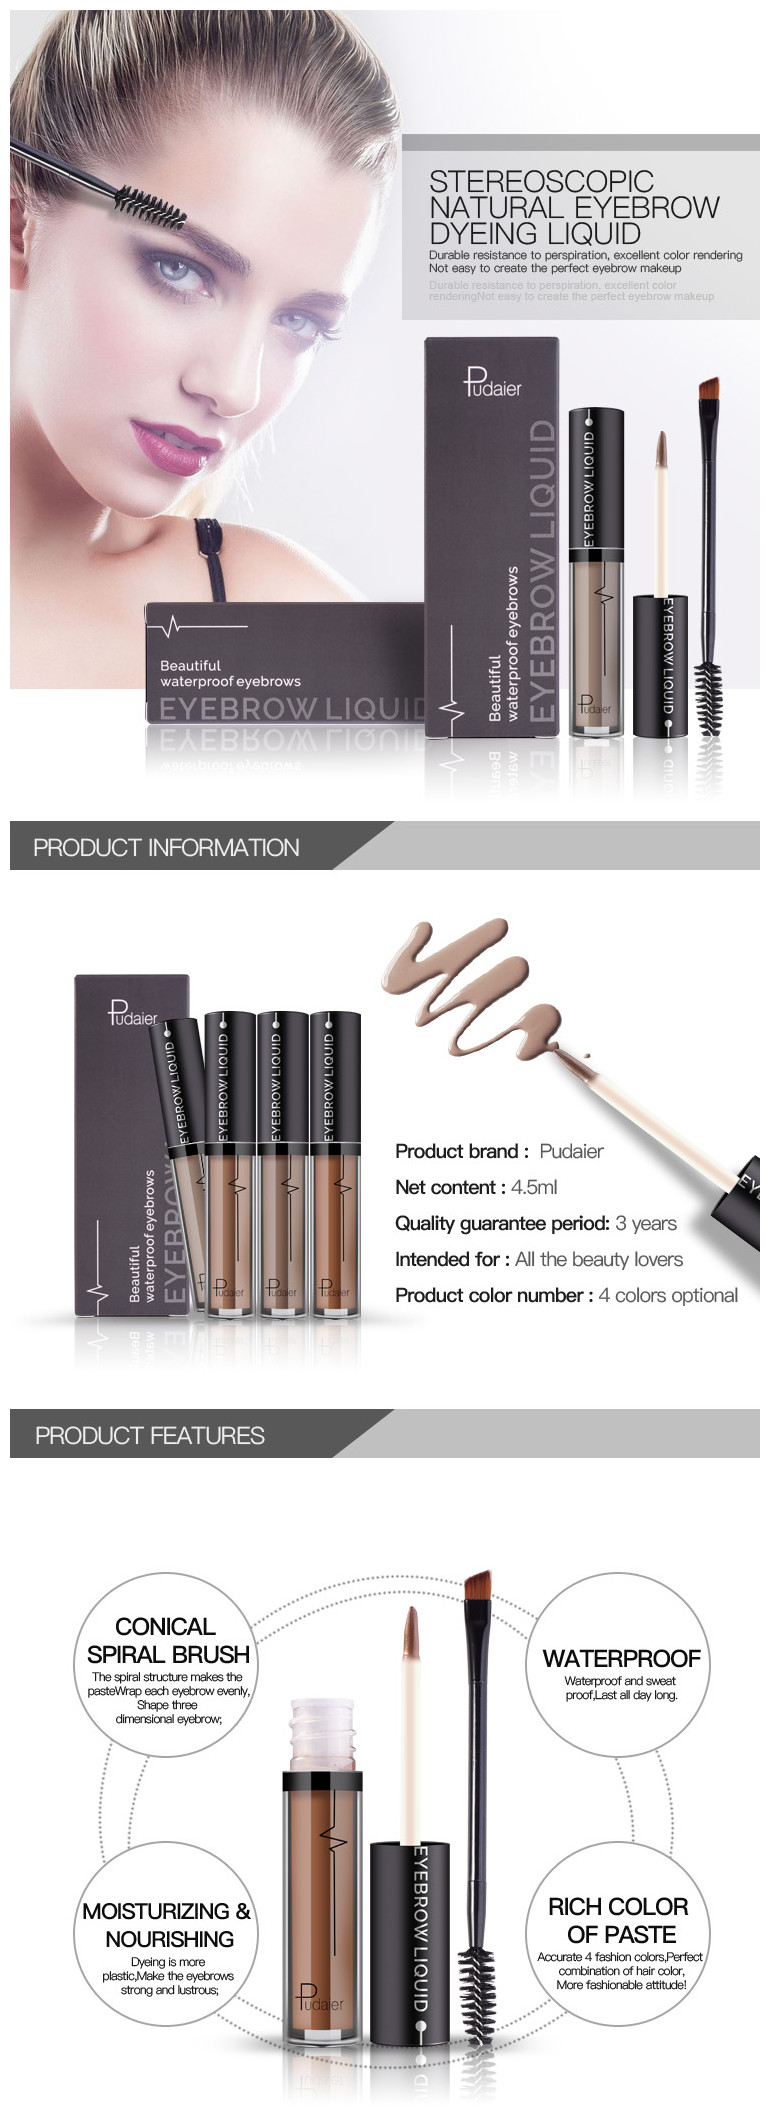 Pudaier Private Label Liquid eyebrow dry fast liquid eyebrow gel your own brand clear brow gel liquid